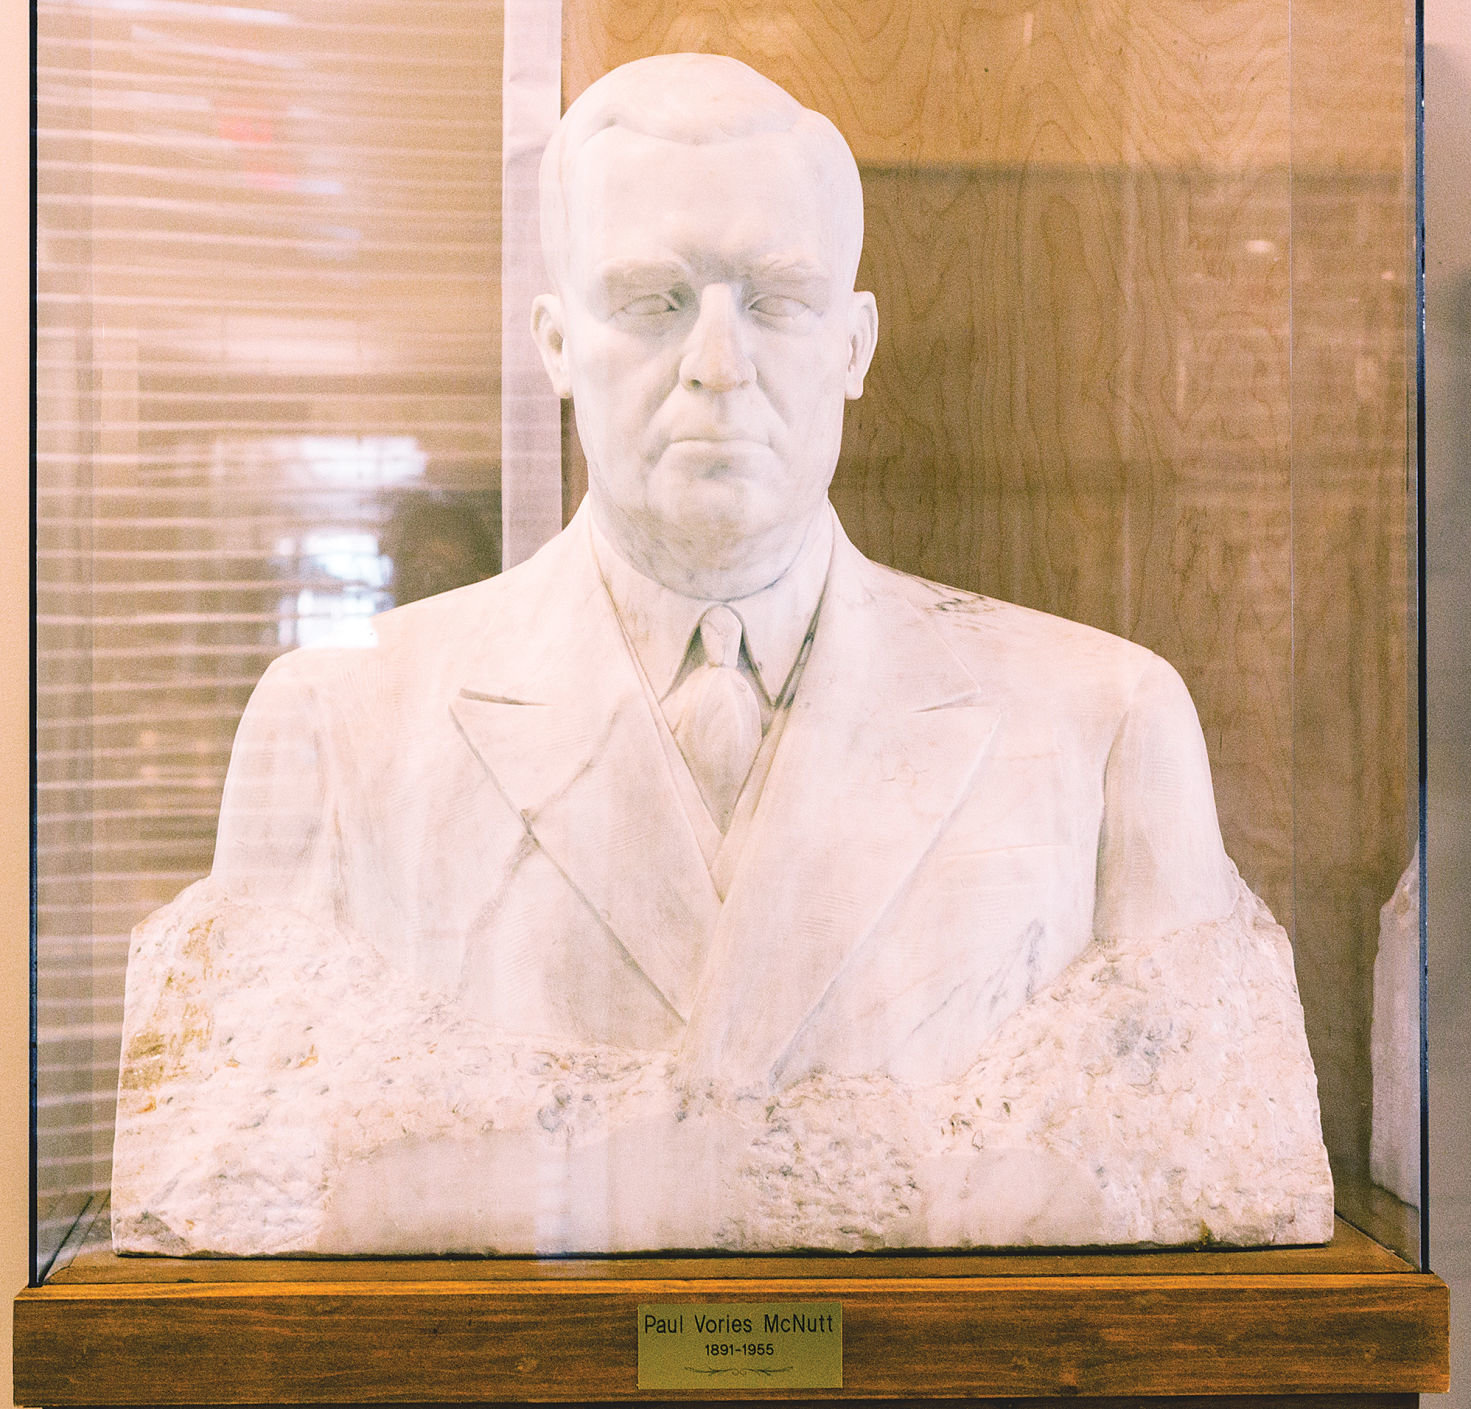 The Indiana University campus in Bloomington displays two sculptures of Paul V. McNutt: a bronze head-and-shoulders bust in the Memorial Union between the two doors to Alumni Hall and this marble one in the McNutt Residence Center.